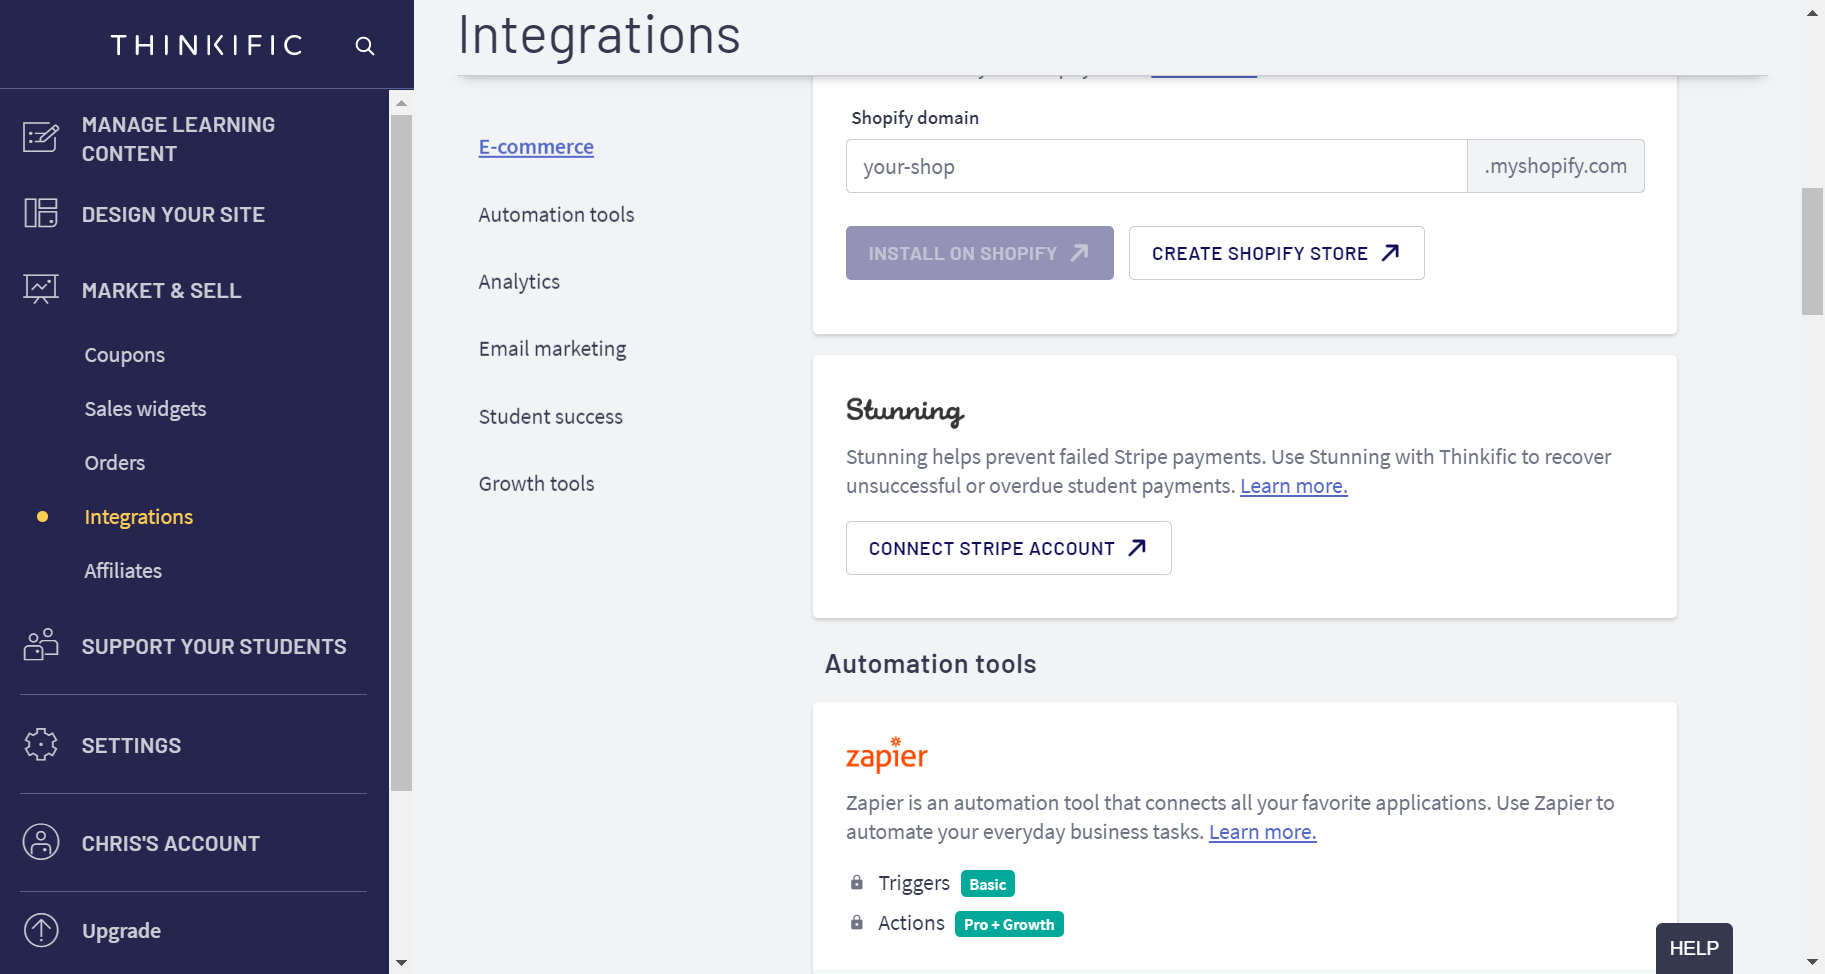 thinkific features integrations